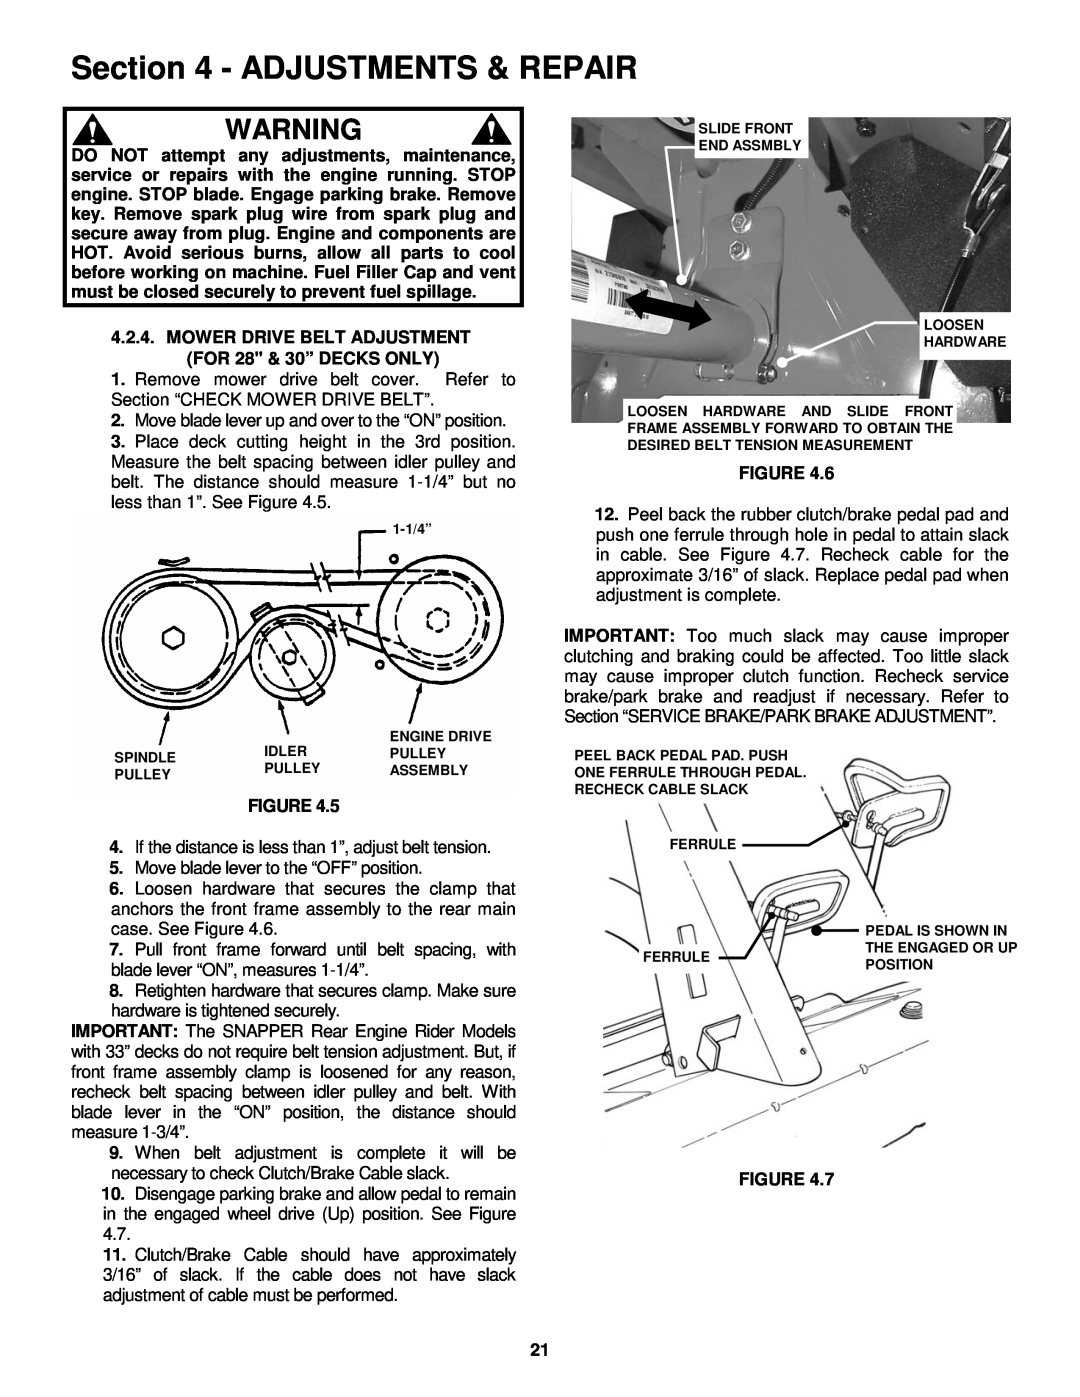 Snapper important safety instructions Adjustments & Repair, Move blade lever up and over to the “ON” position 